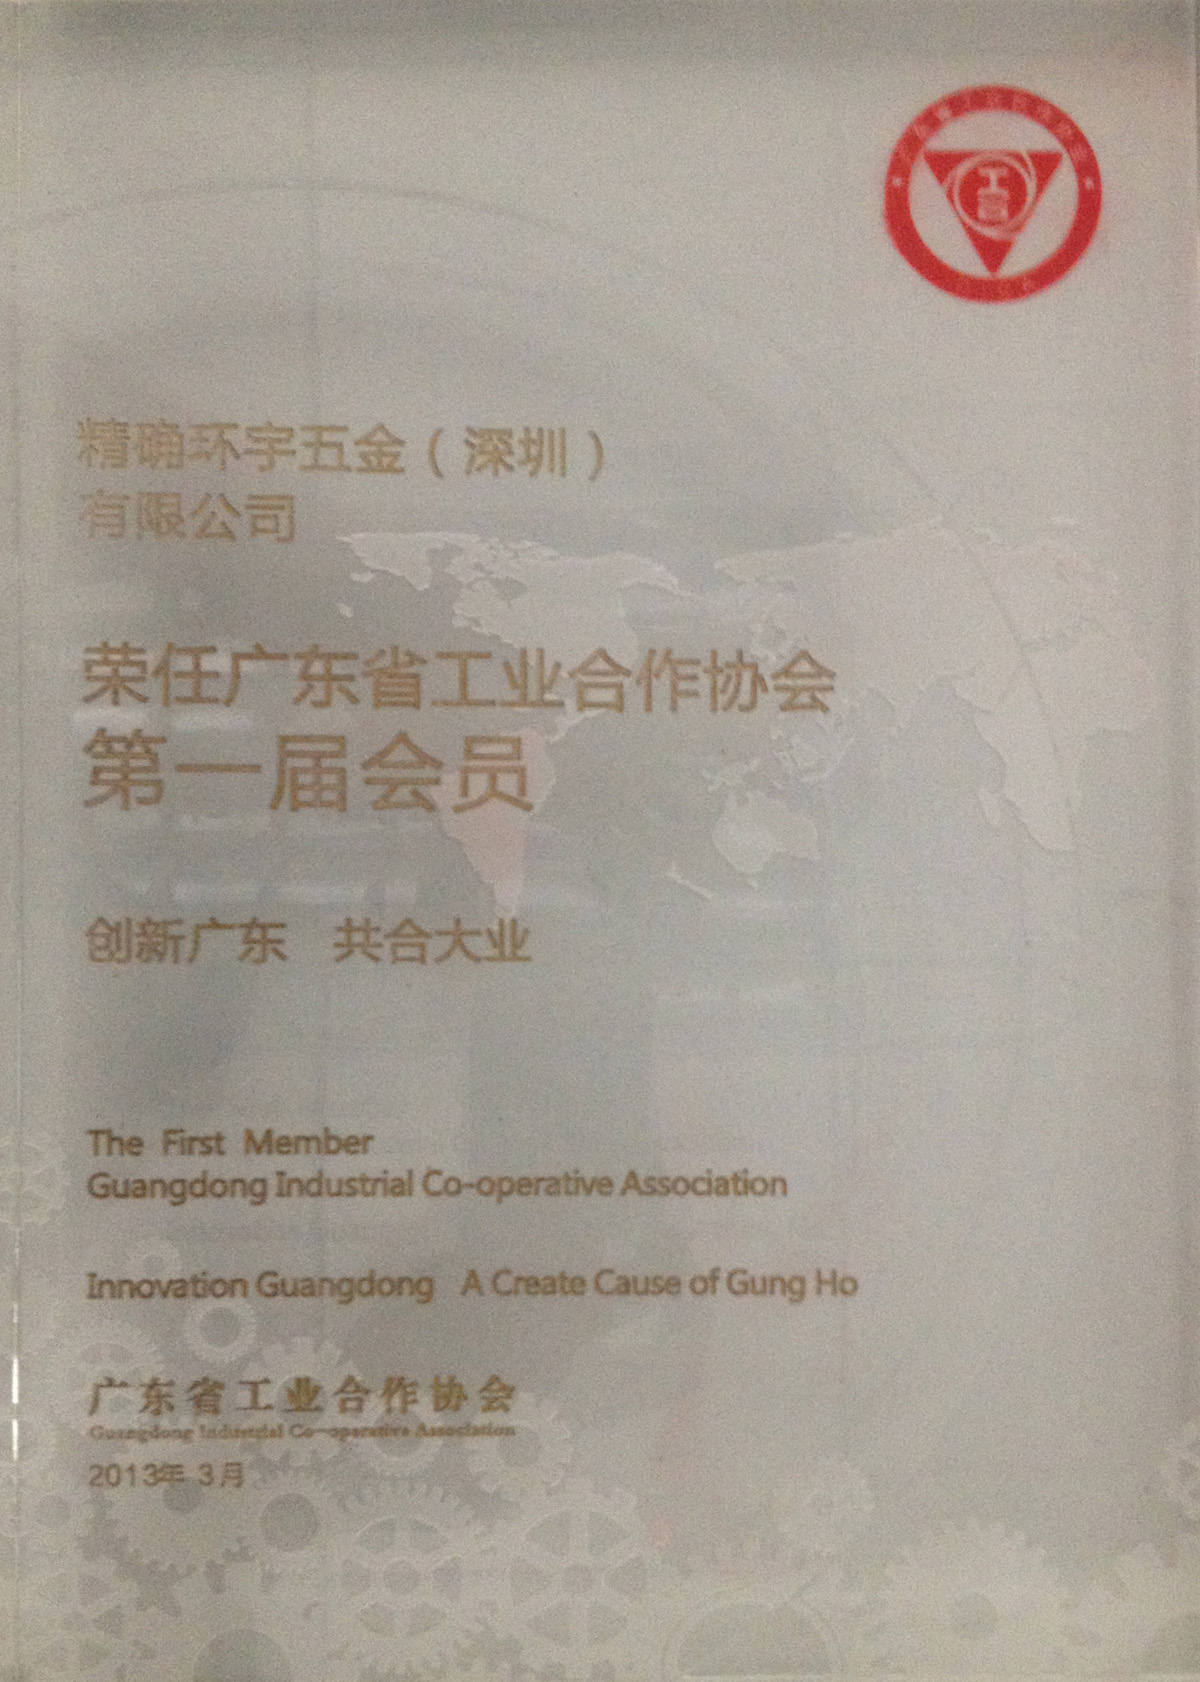 Join Guangdong Industrial Co-operative Association 